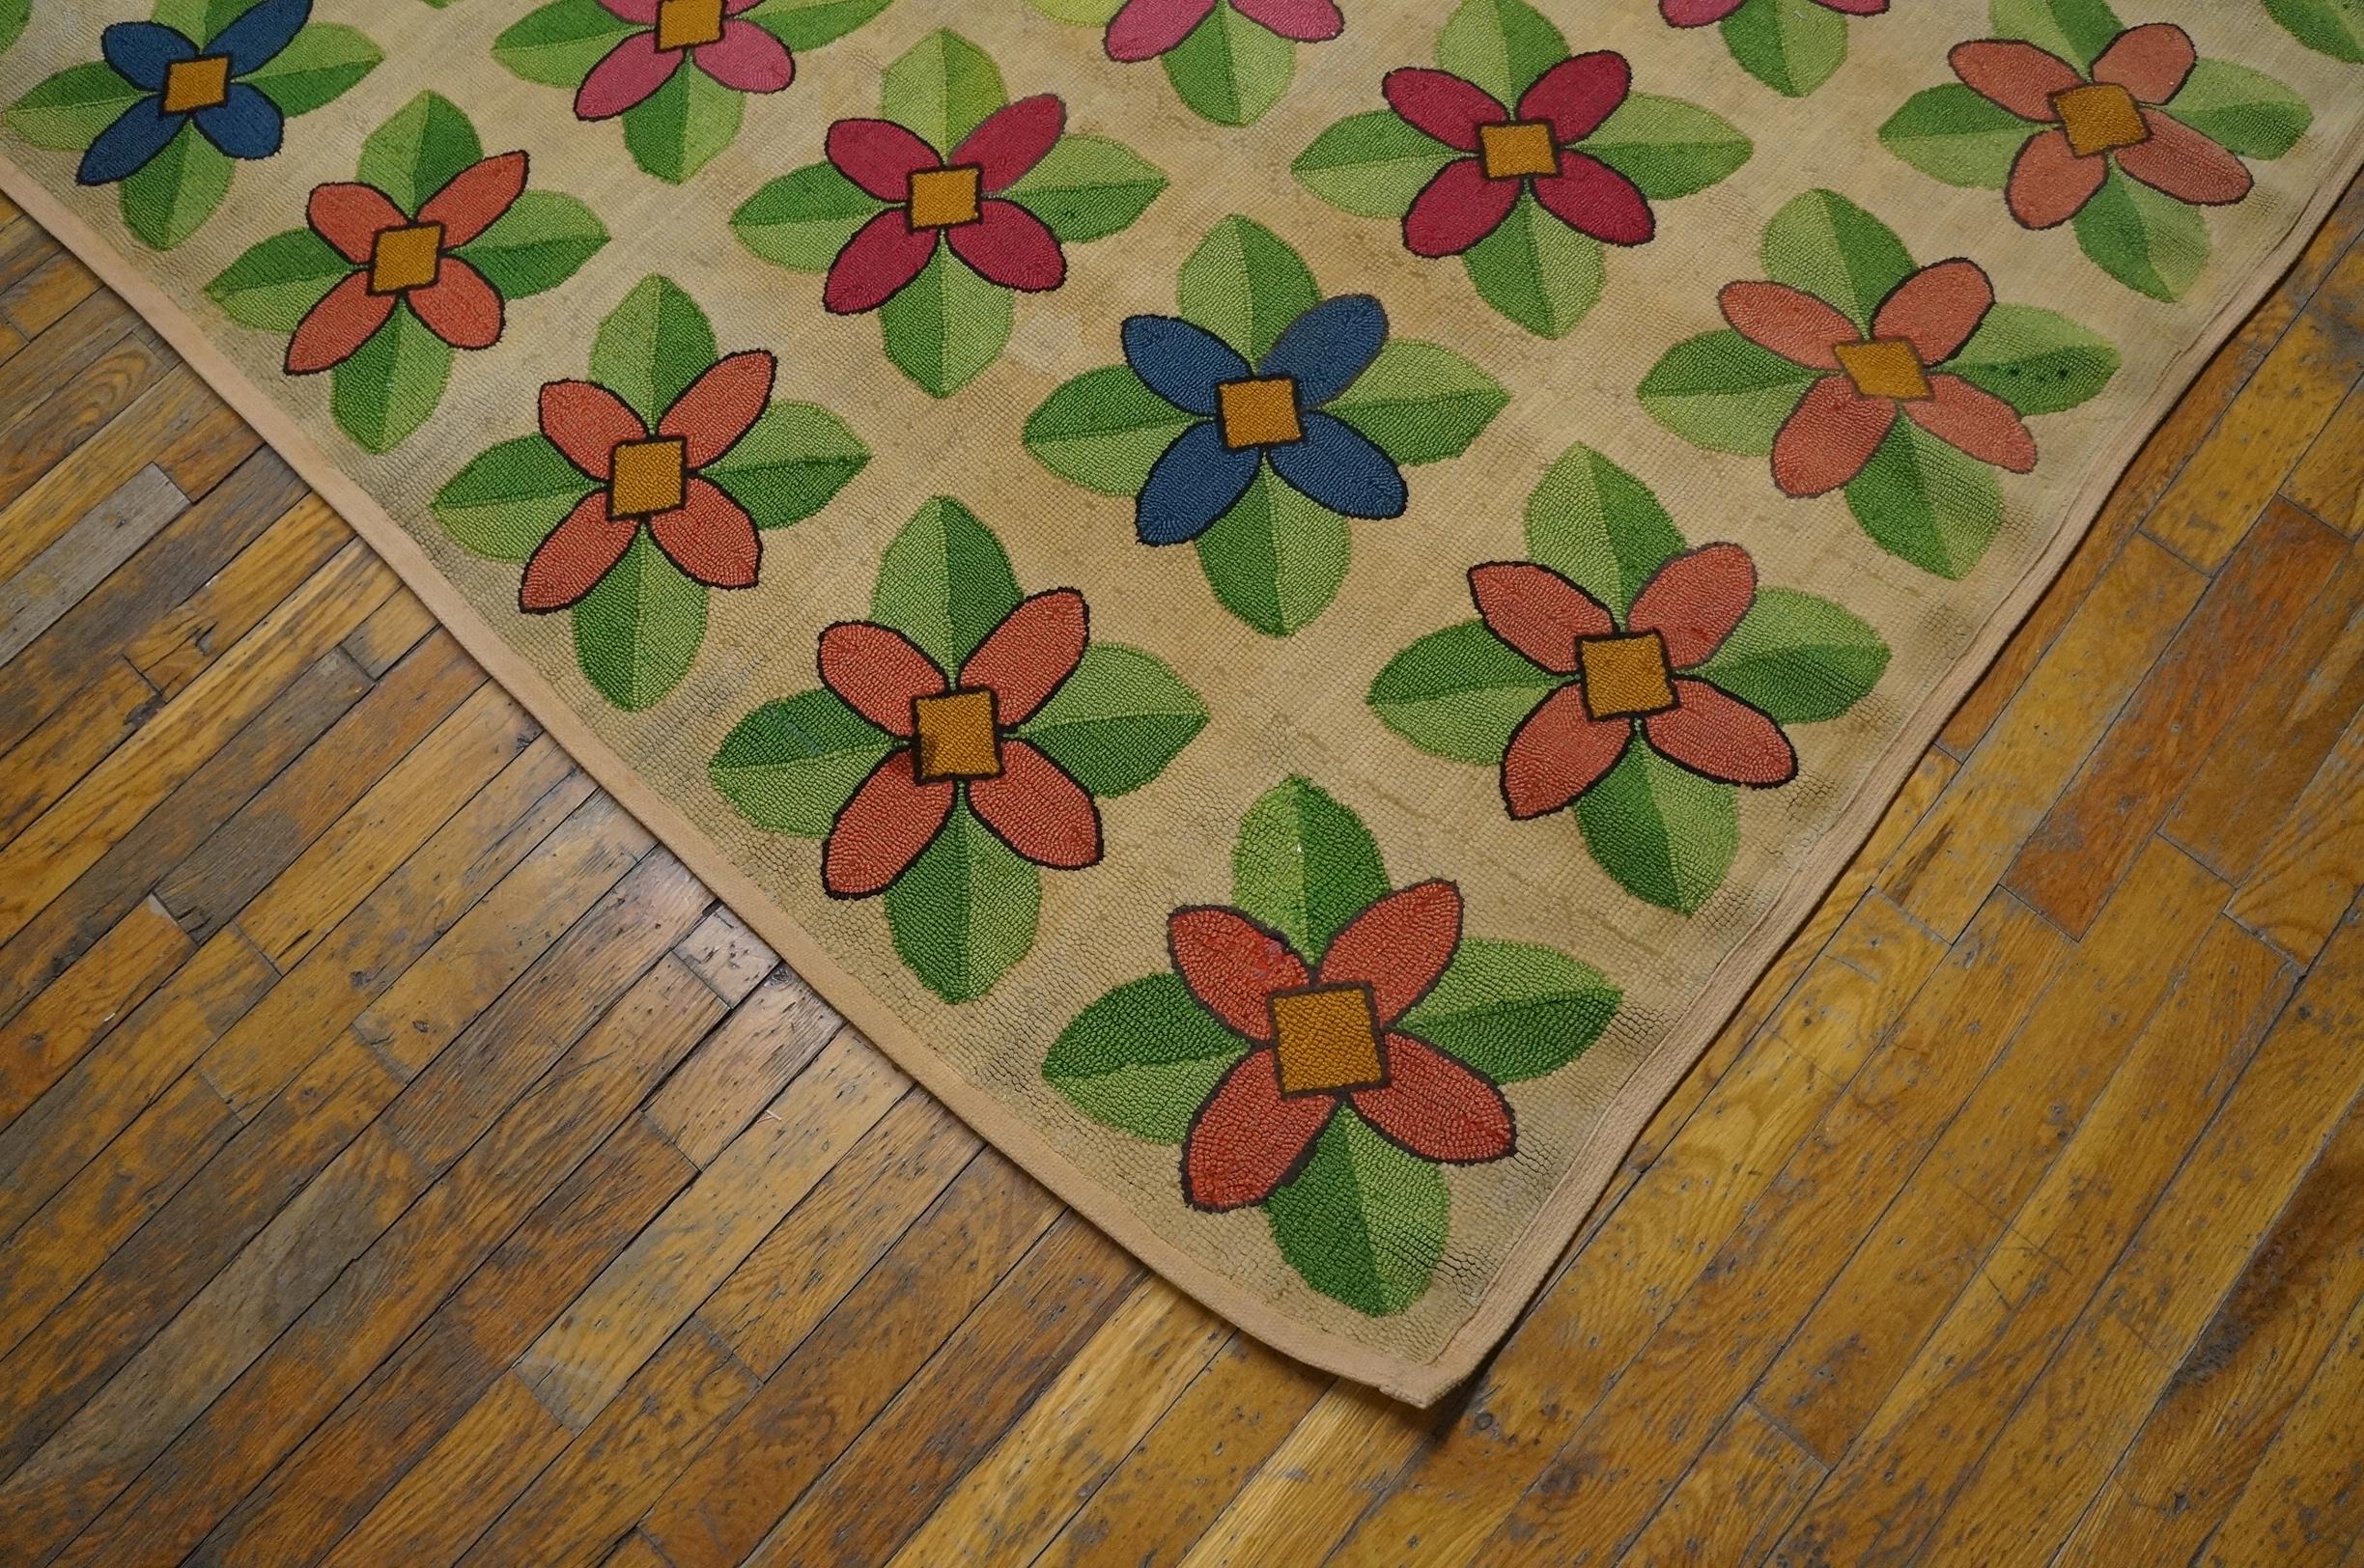 Early 20th Century American Hooked Rug ( 9' x 12' - 274 x 366 ) For Sale 1